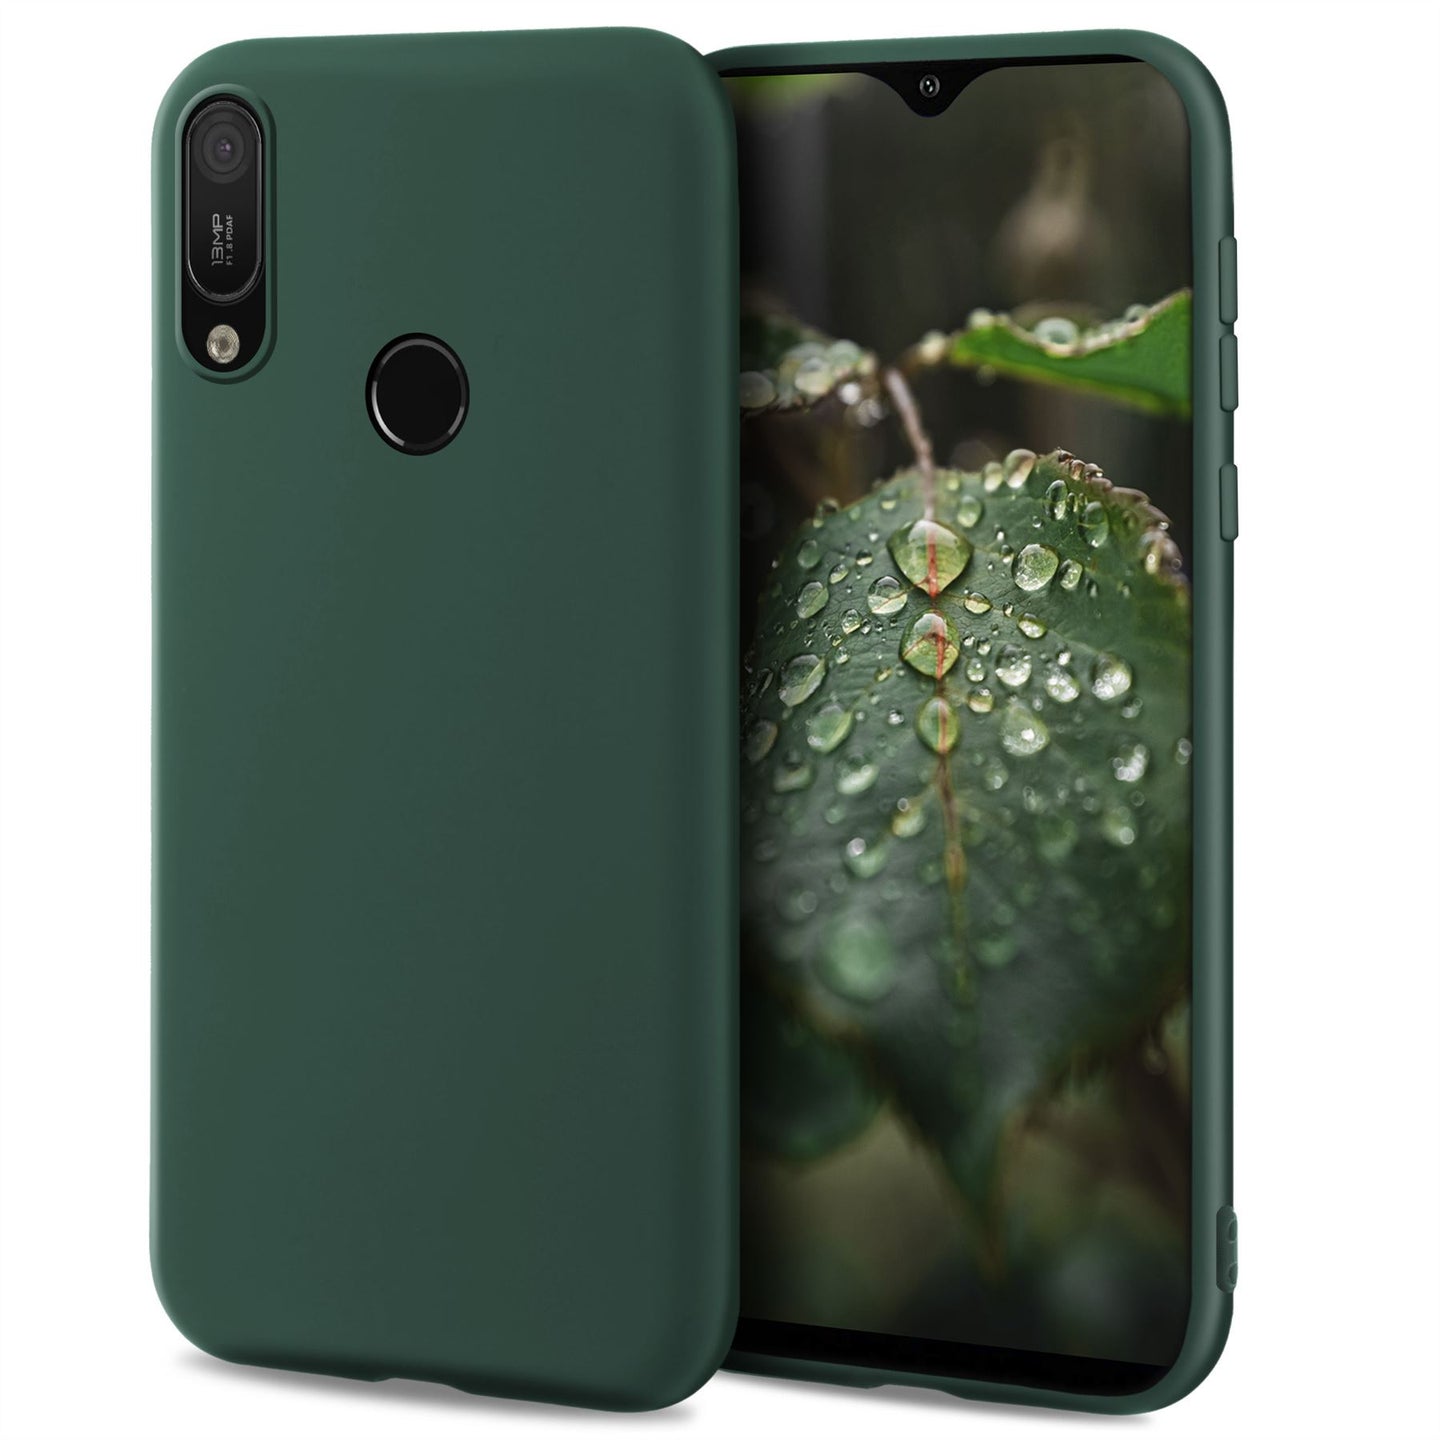 Moozy Lifestyle. Designed for Huawei Y6 2019 Case, Dark Green - Liquid Silicone Cover with Matte Finish and Soft Microfiber Lining